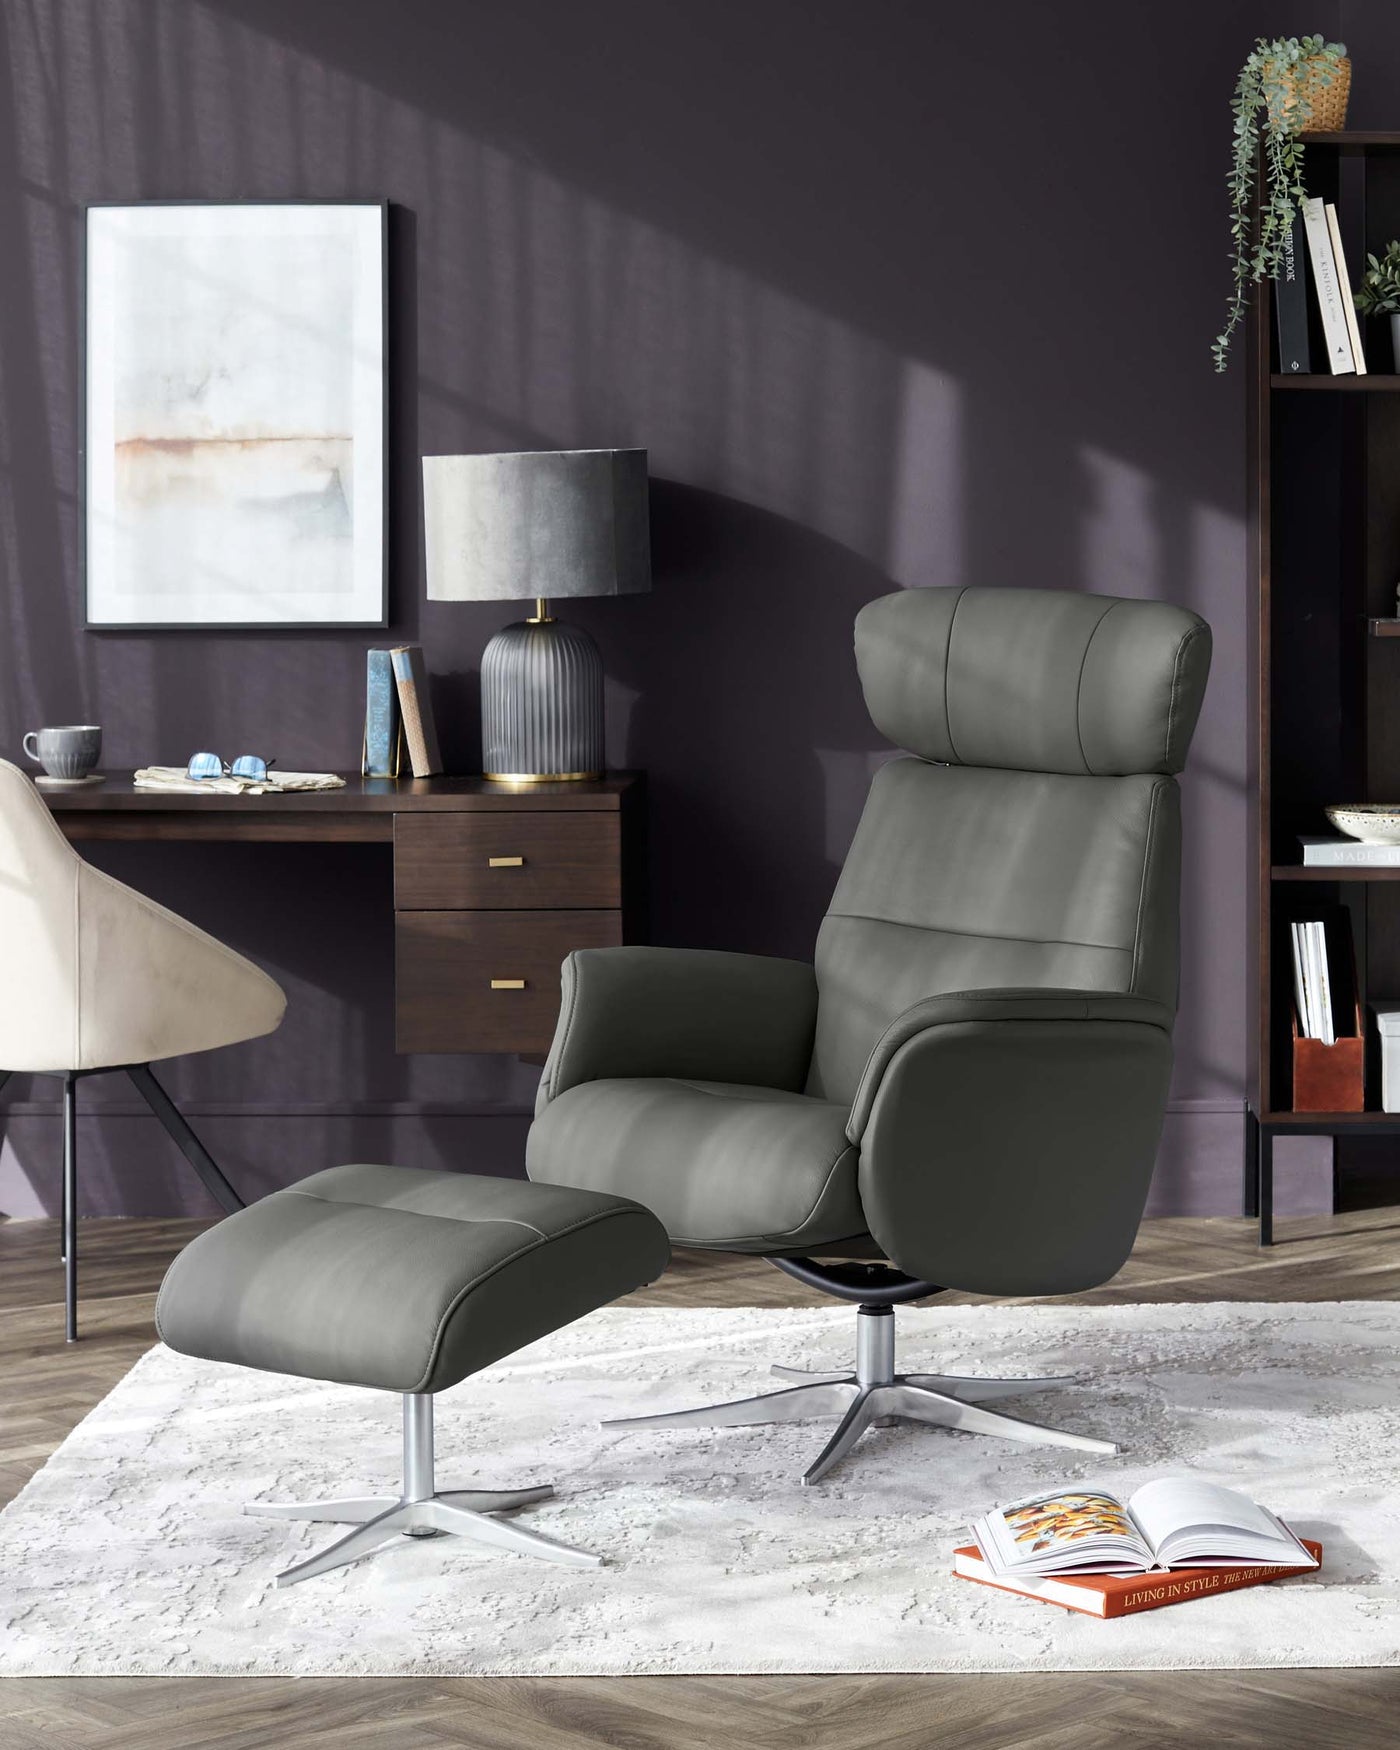 Modern grey leather recliner chair with matching footstool, featuring a sleek metal base, showcased in a contemporary living room setting with a wooden sideboard and shelving unit in the background.